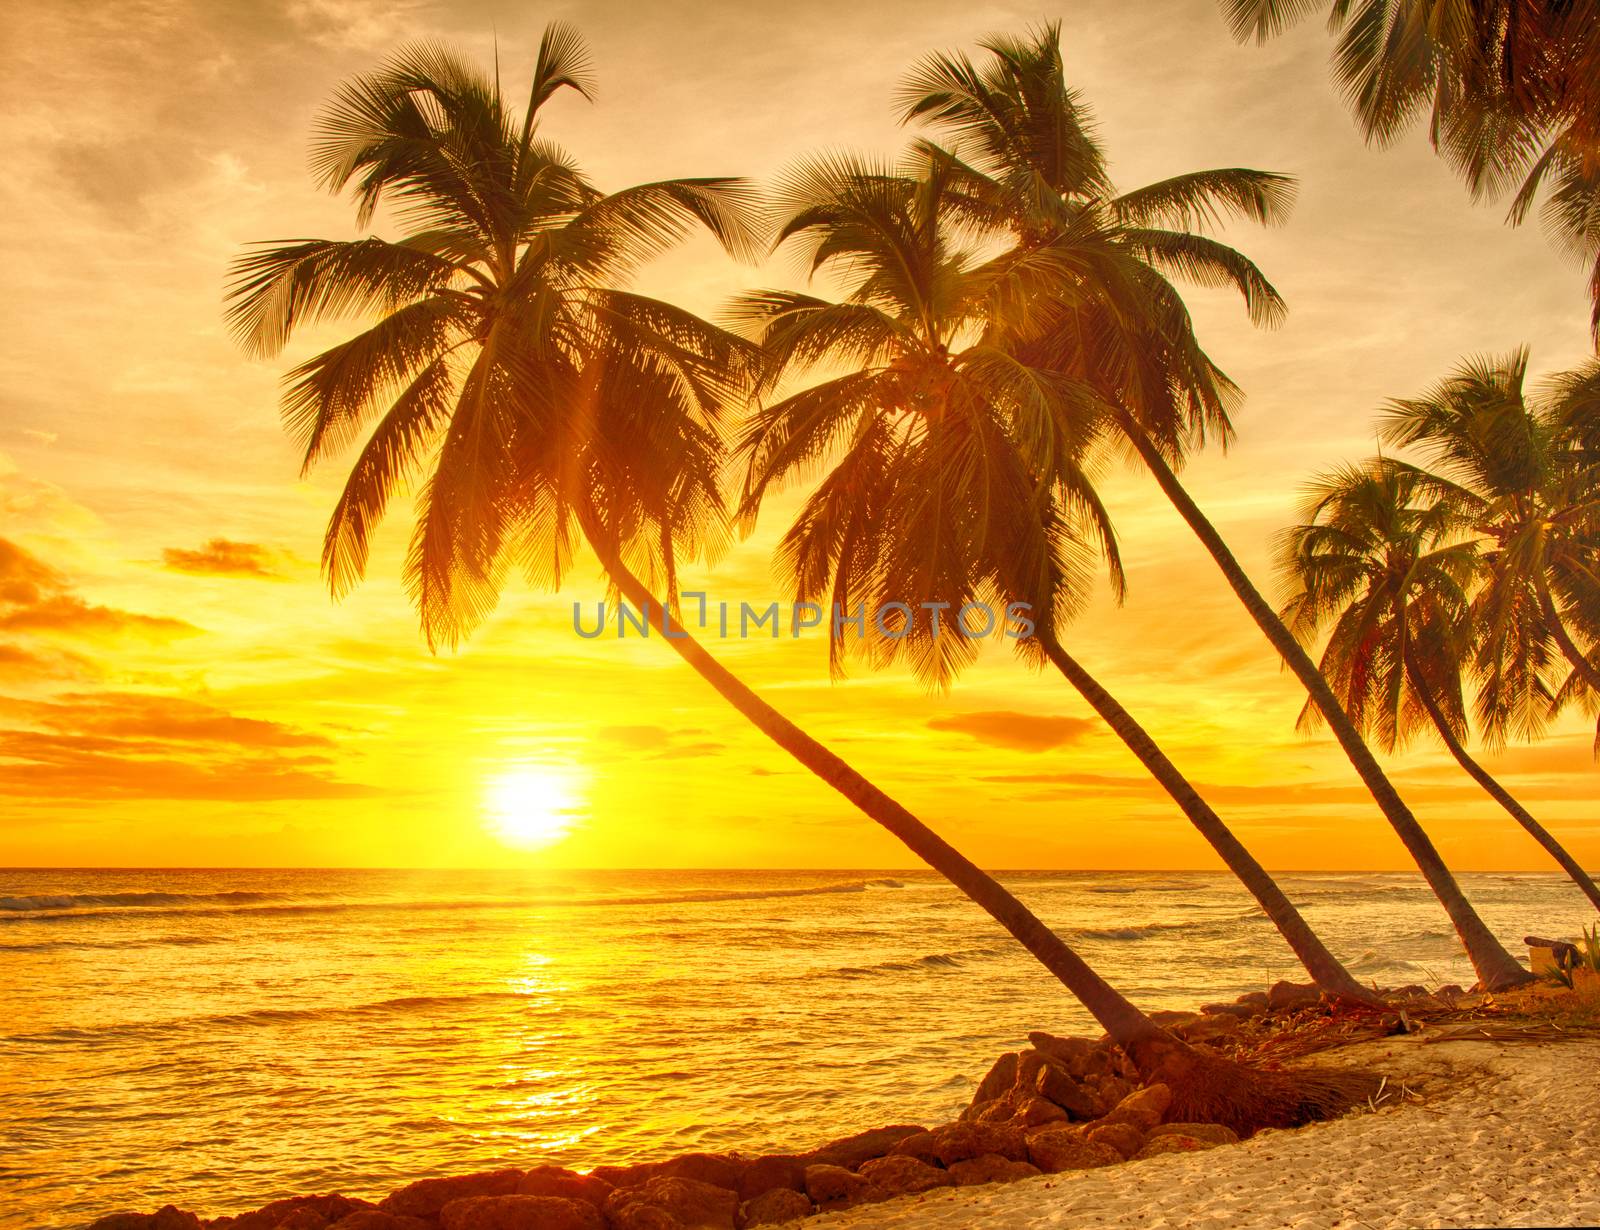 Beautiful sunset over the sea with a view at palms on the white beach on a Caribbean island of Barbados